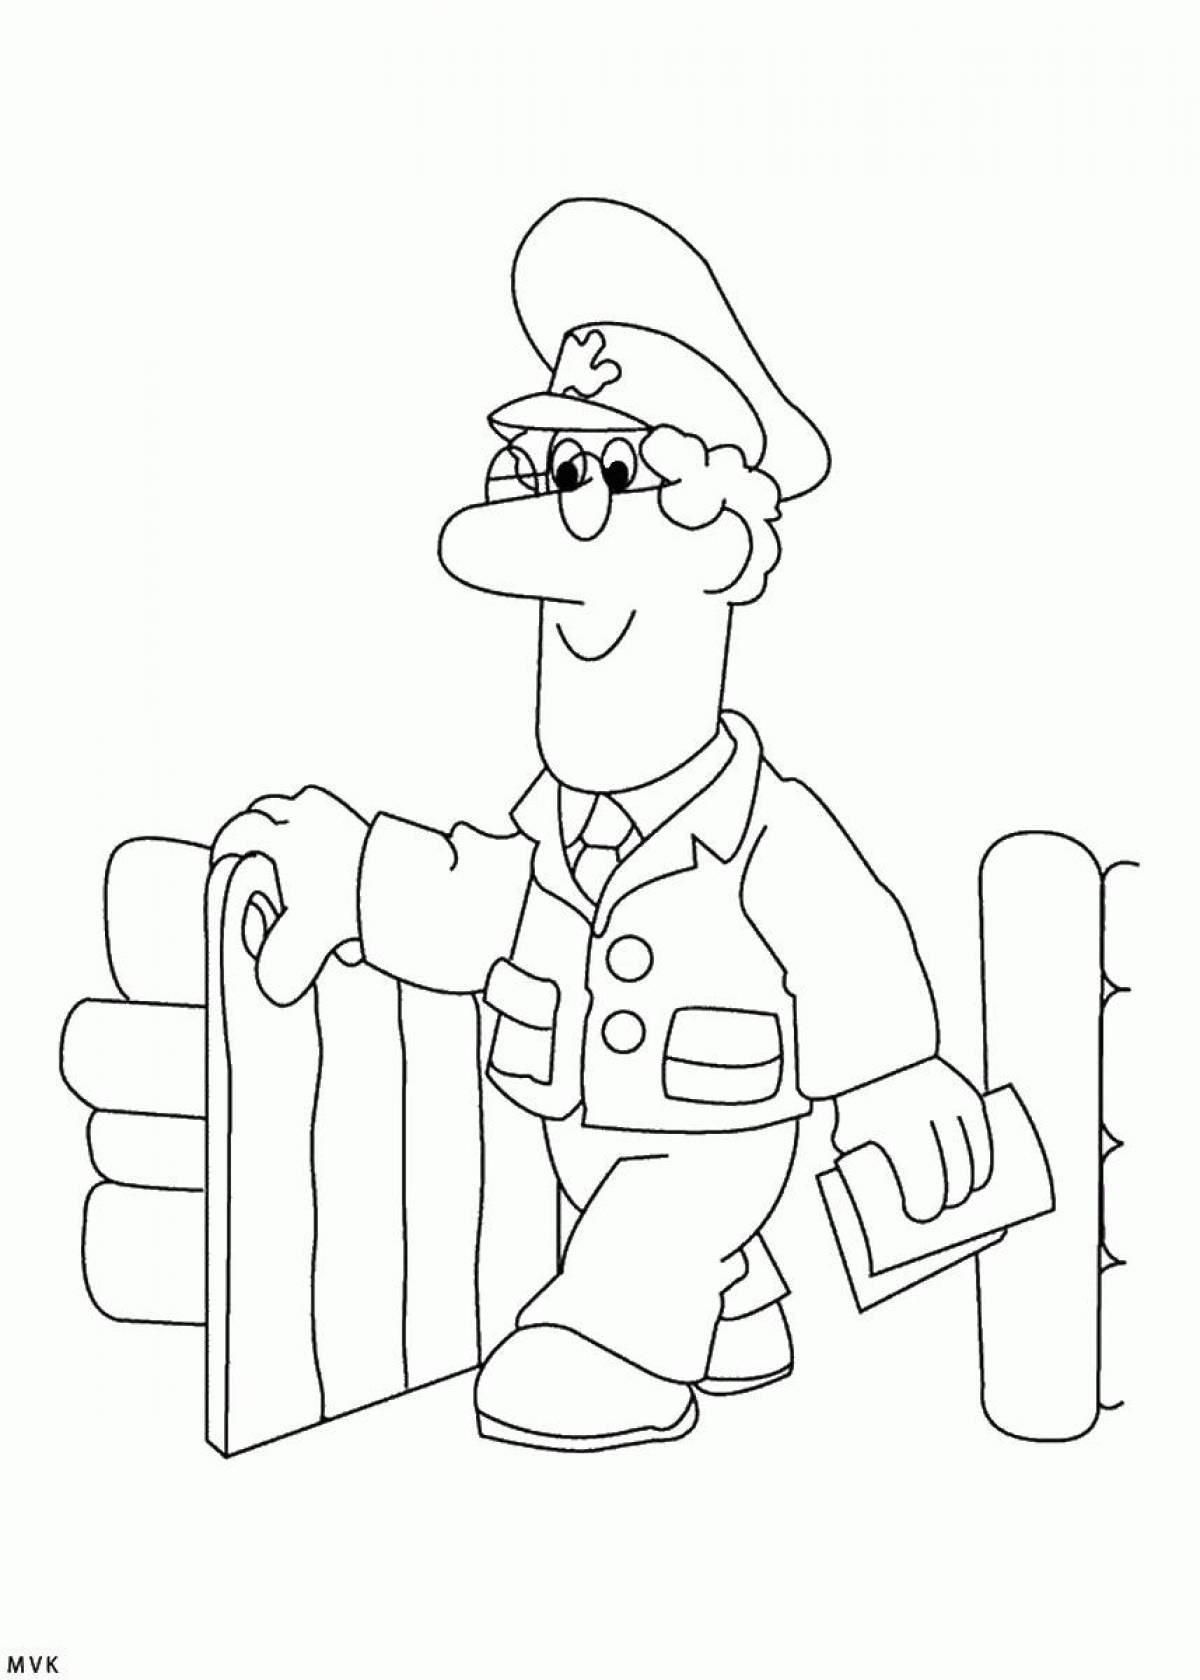 Animated mail coloring page